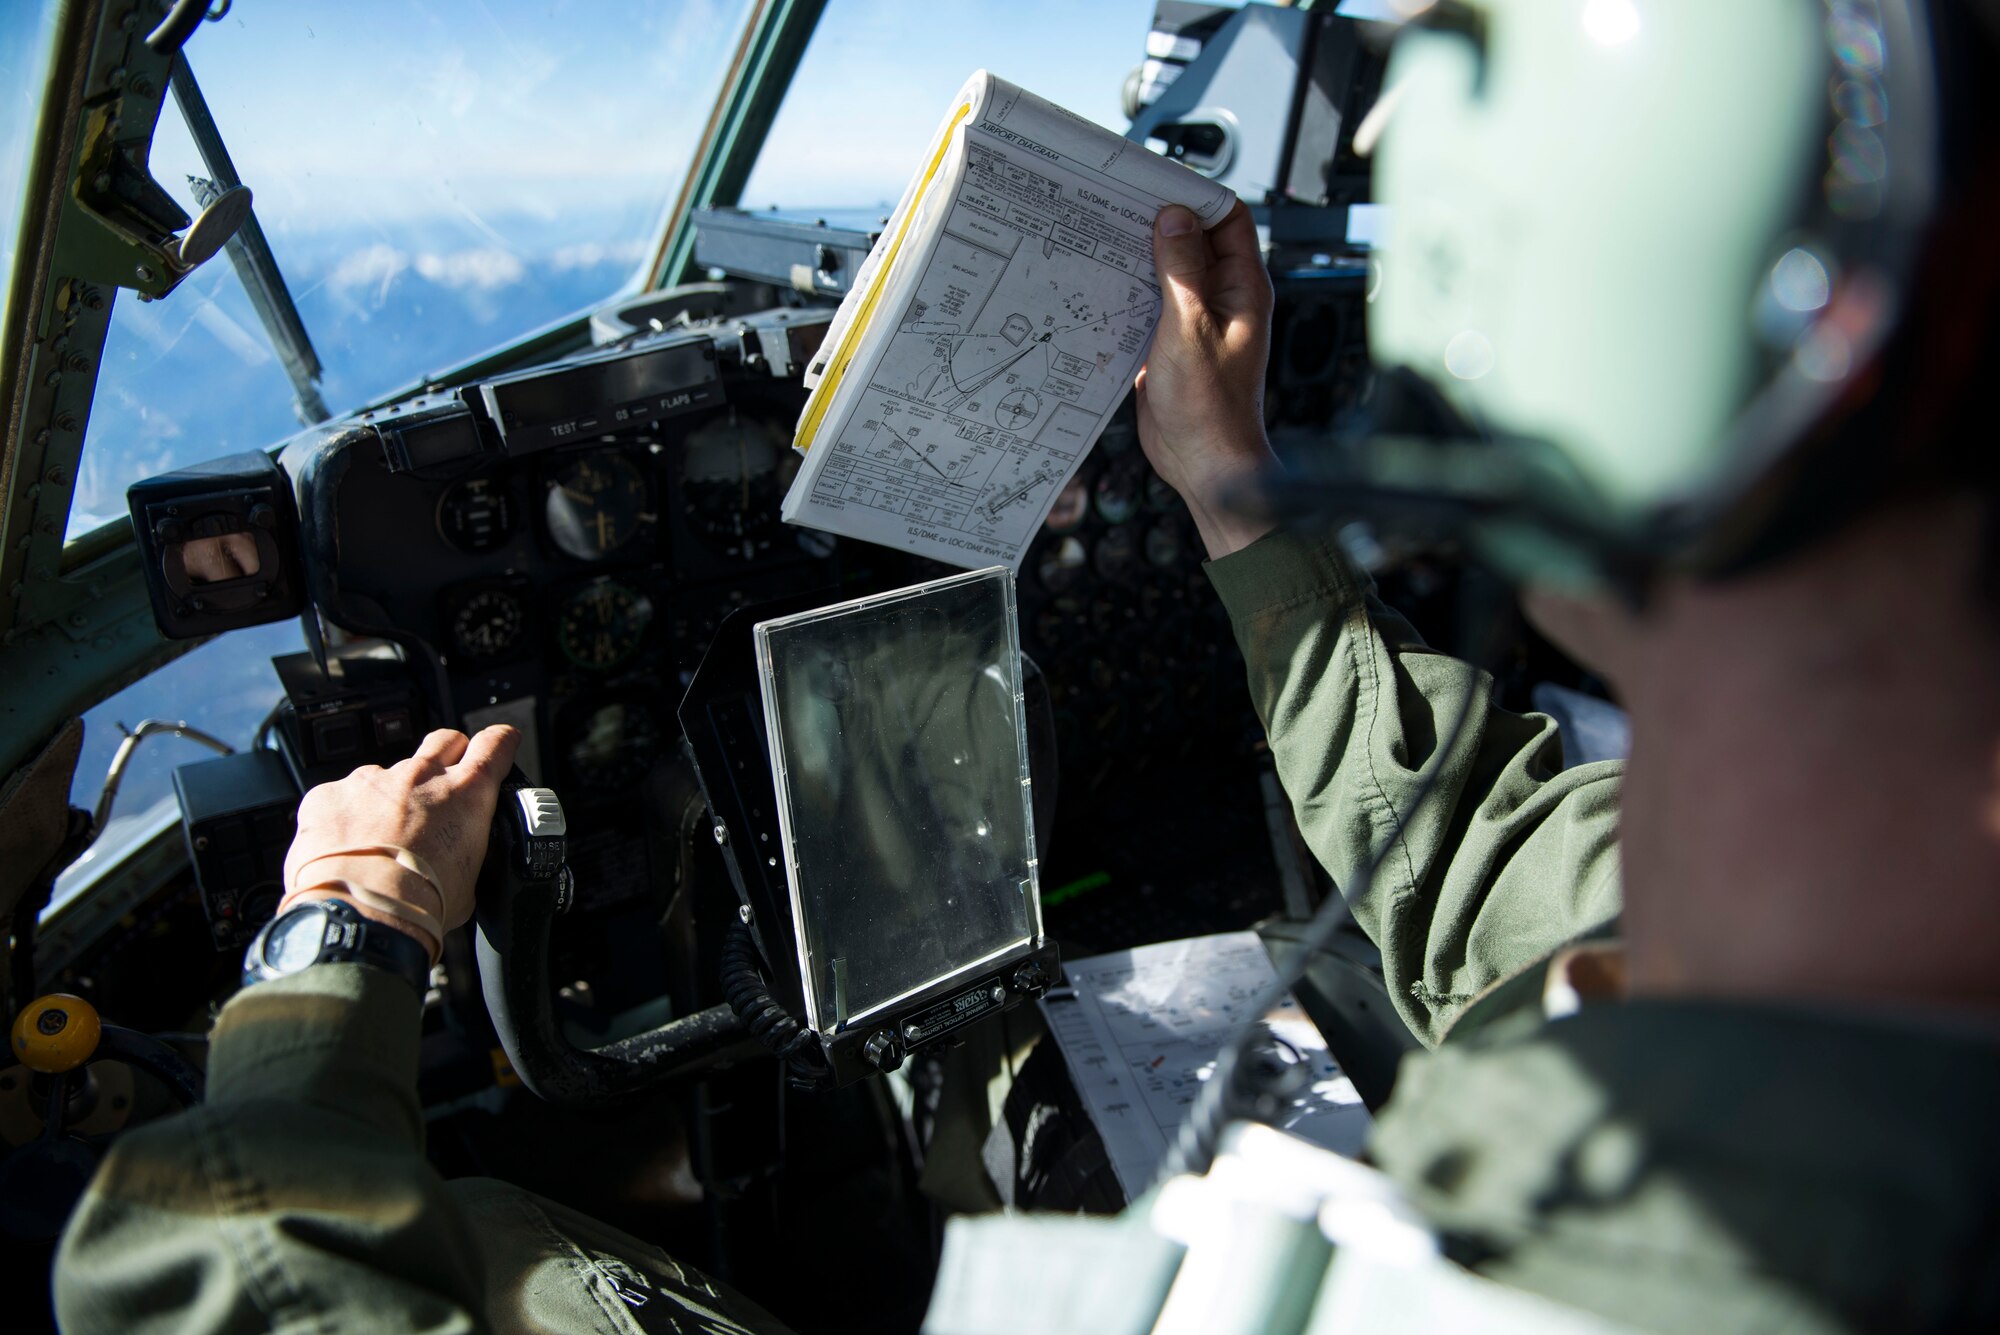 Capt. Shawn Hooton puts a map on display during a flight Nov. 19, 2014, over South Korea. Hooton and other members of the 36th Airlift Squadron flew to South Korea to participate in Max Thunder, a biannual exercise focused on improving the interoperability of the U.S.-South Korea partnership. Hooton is a 36th AS C-130 Hercules pilot. (U.S. Air Force photo/Staff Sgt. Cody H. Ramirez)